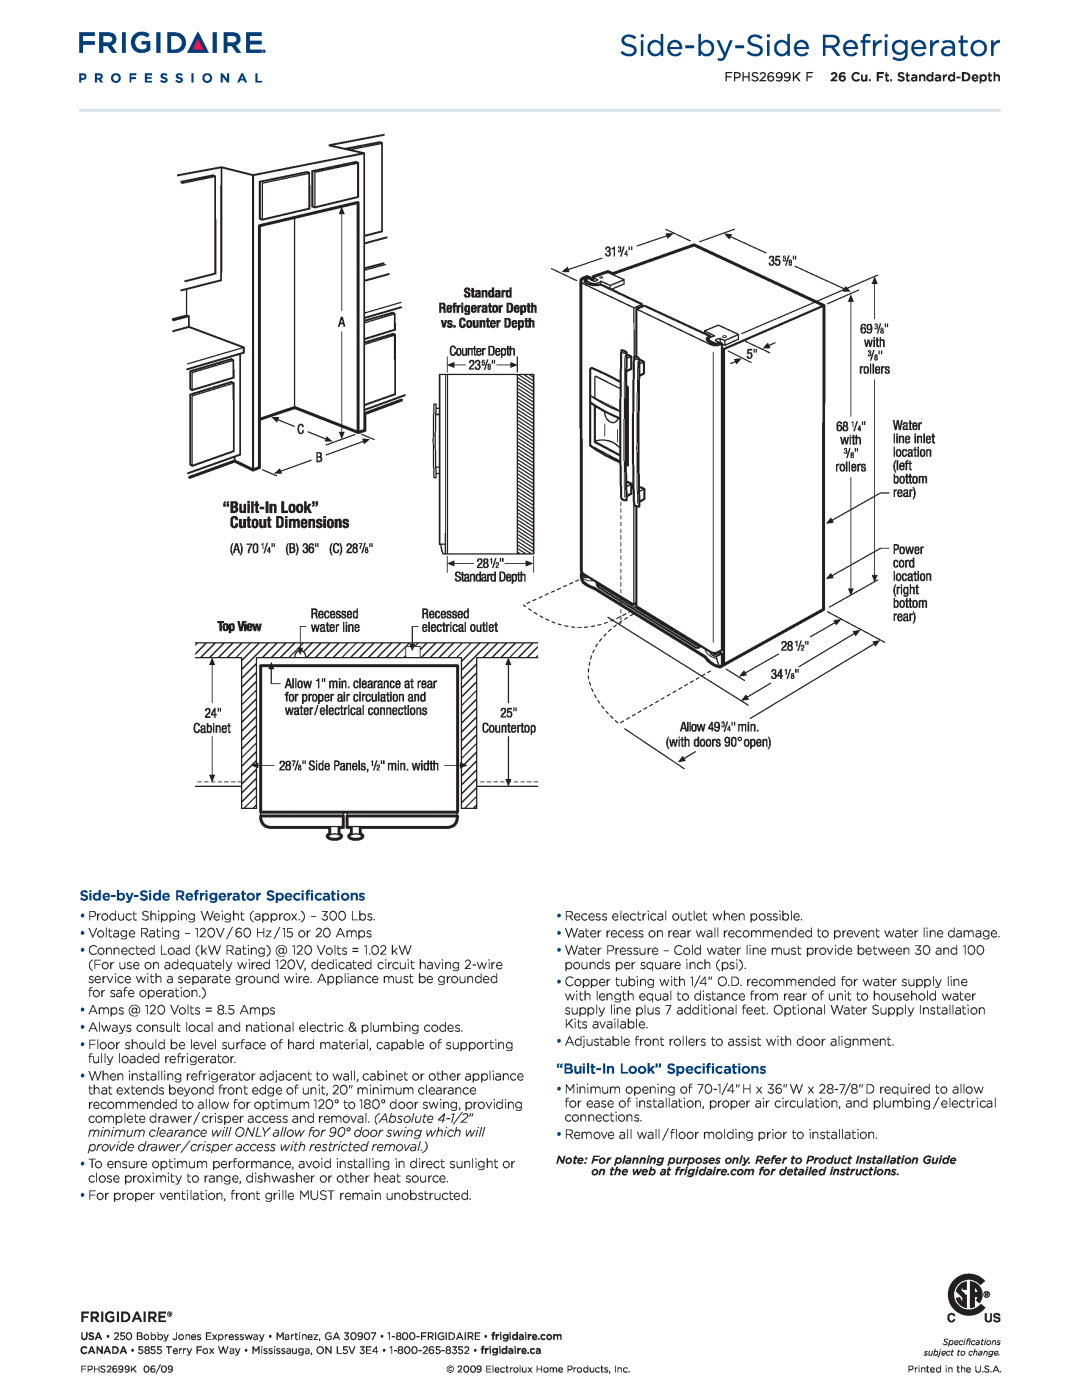 Frigidaire FPHS2699KF dimensions Side-by-SideRefrigerator Specifications, “Built-InLook” Specifications, Frigidaire 